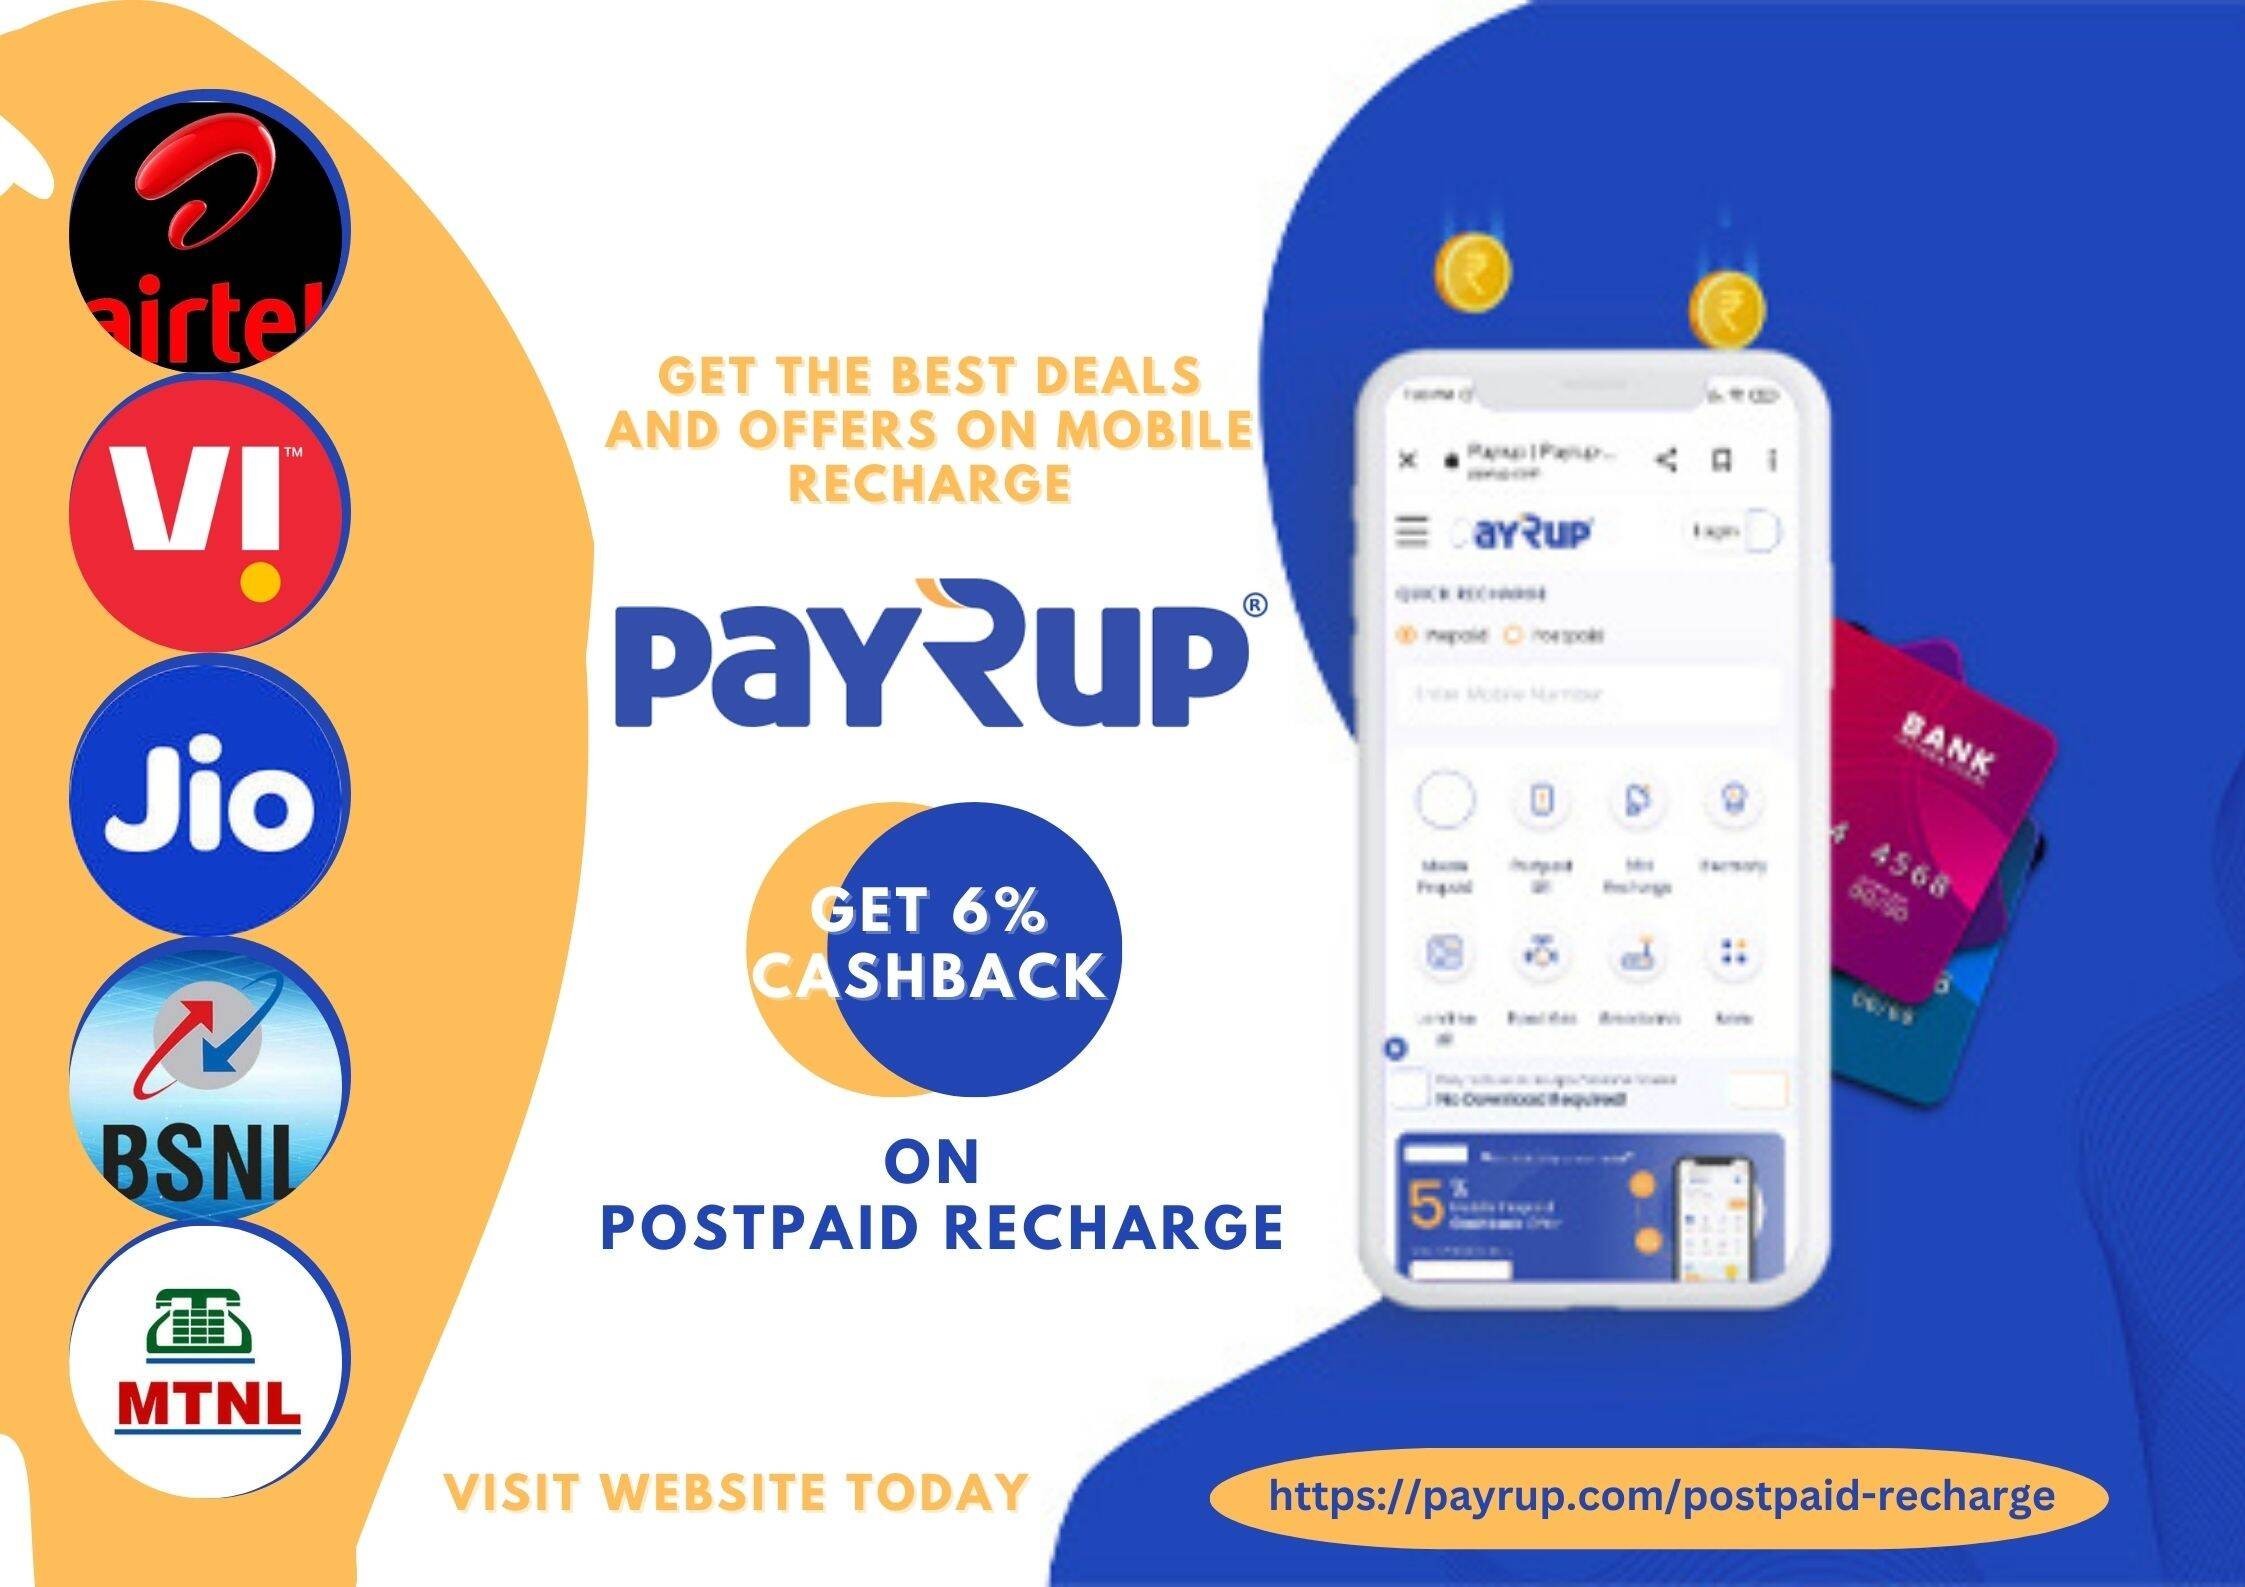 Get Instant Recharge On Your Postpaid Mobile